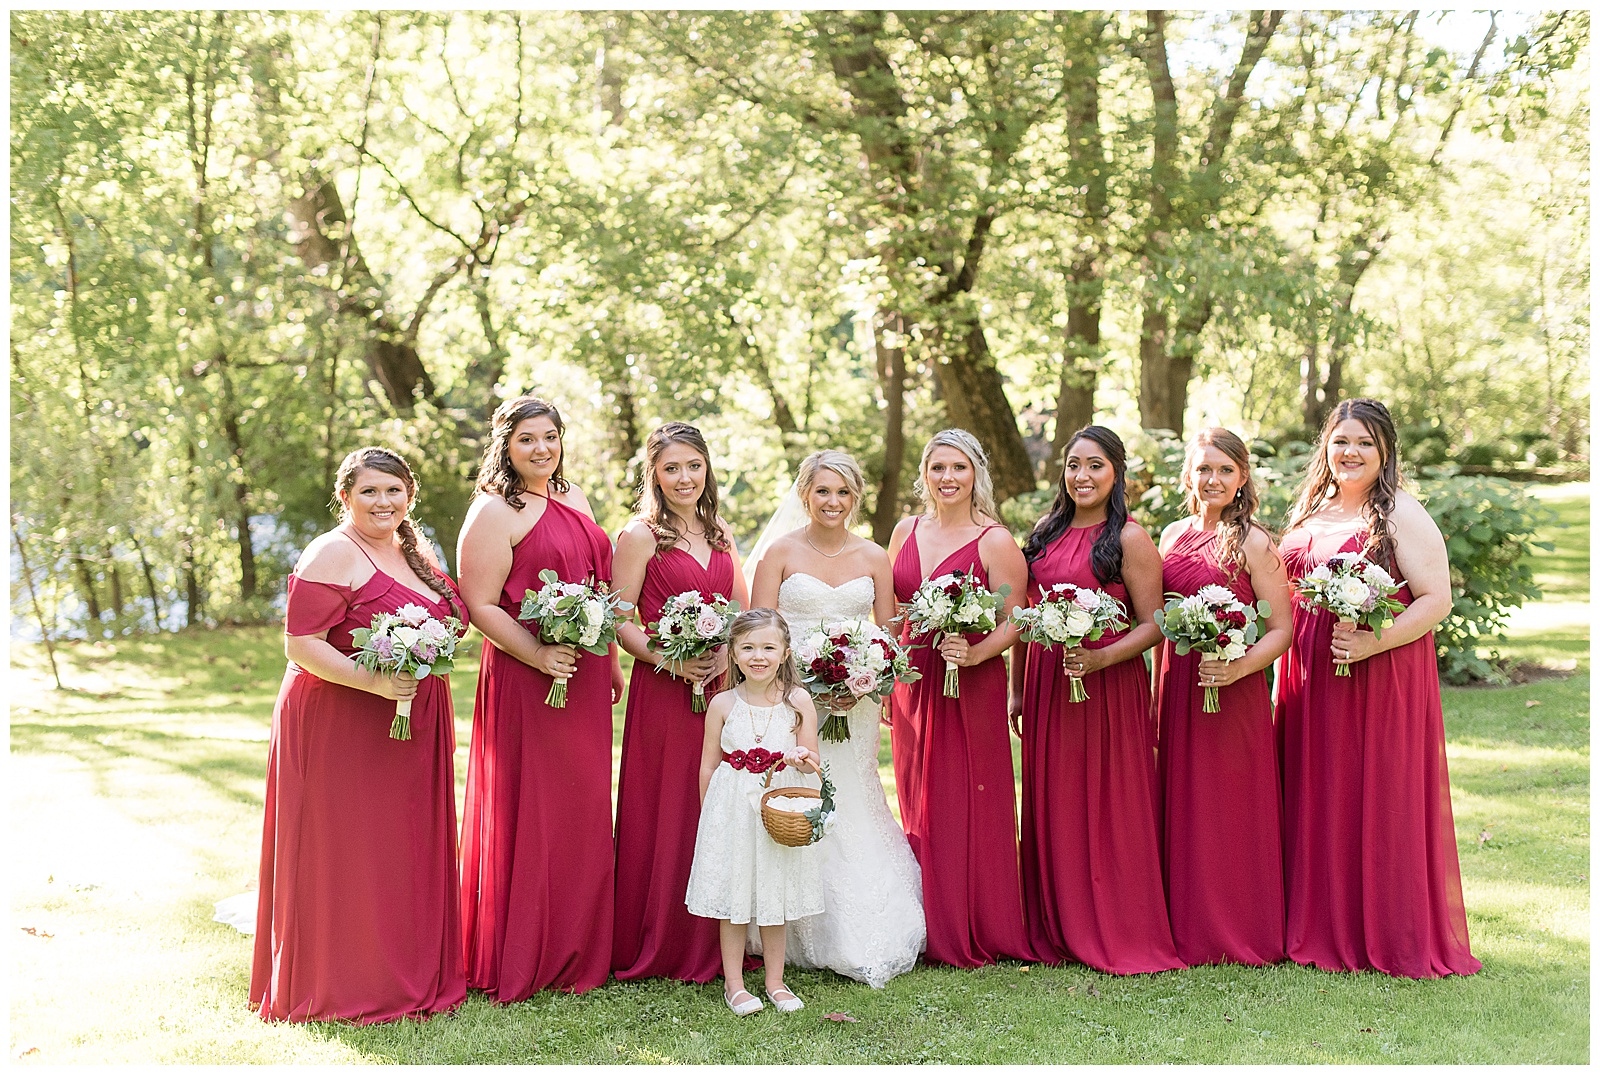 bride is standing in the middle of photo with three bridesmaids to her right and four bridesmaids to her left and the flowergirl standing in front of the bride and everyone is holding their floral bouquets and looking at the camera and smiling while standing in the grass with trees behind them at Riverdale Manor in Lancaster, PA